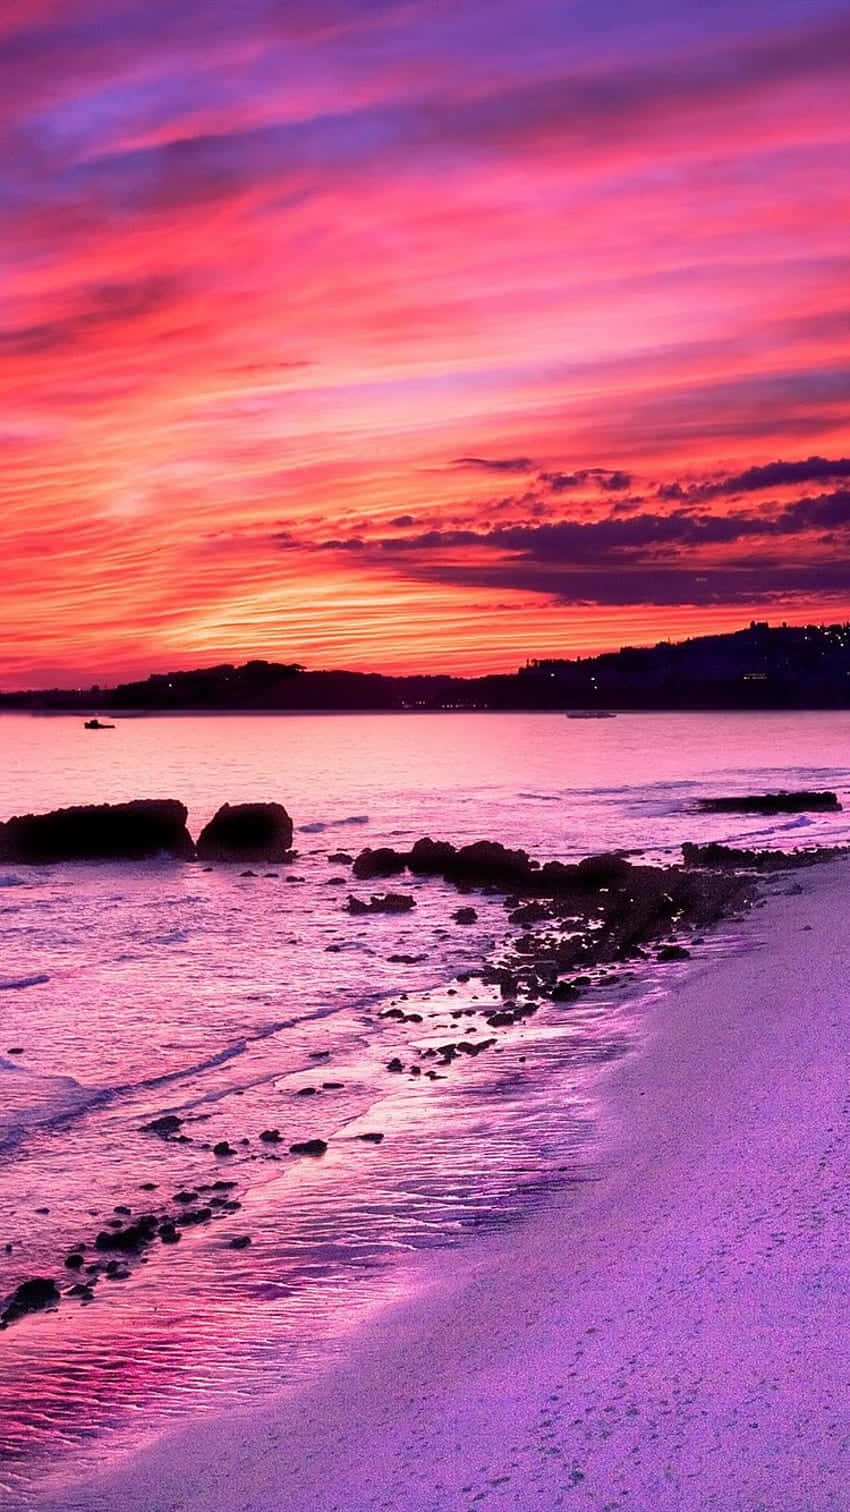 Soak in the dreamy pink sunset with the waves lapping at your feet. Wallpaper